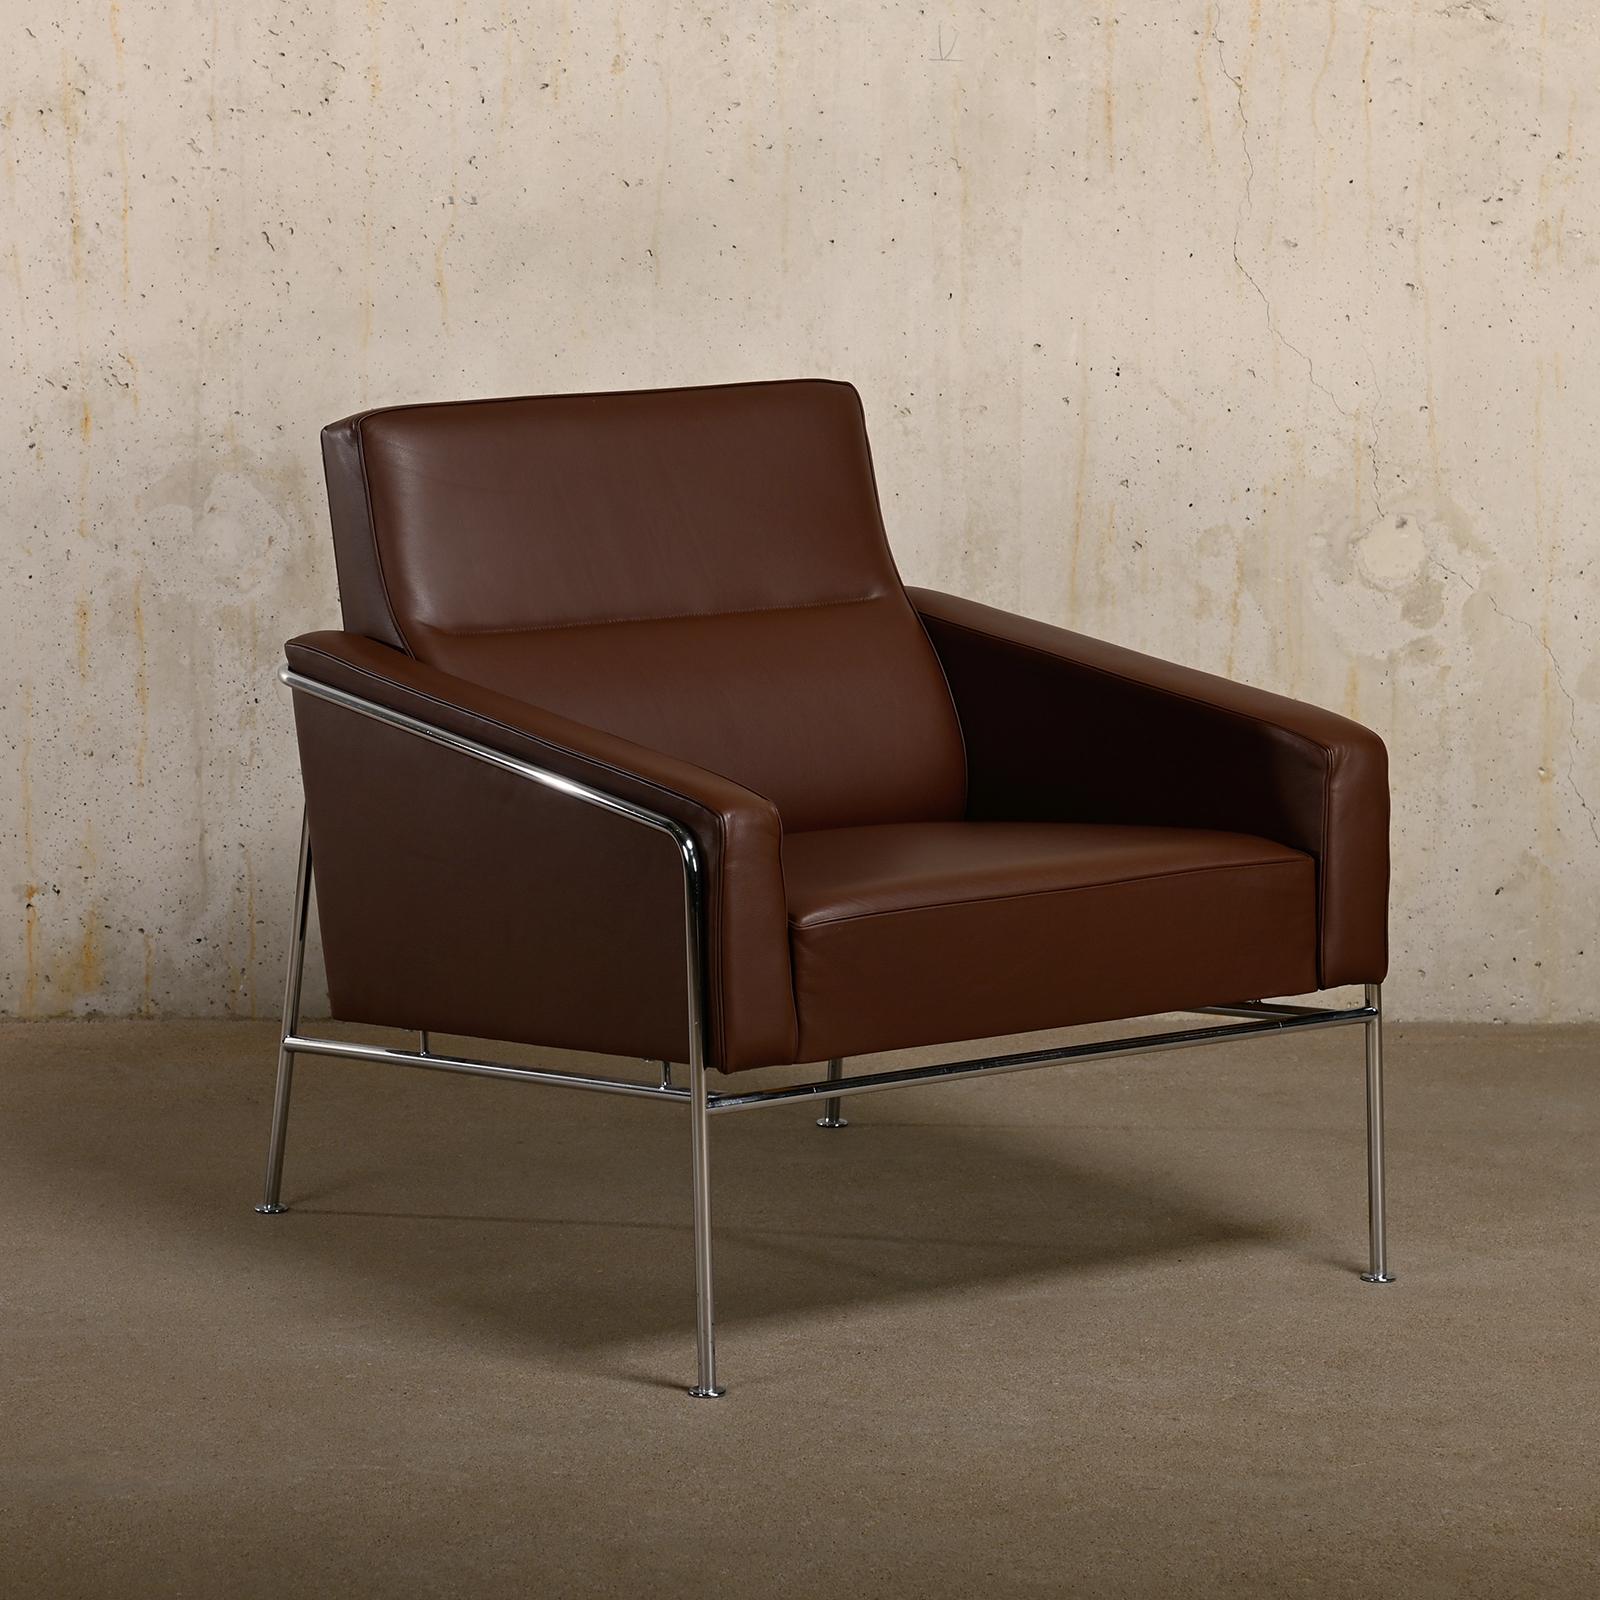 This Lounge Chair was designed by Arne Jacobsen for the SAS Air Terminal connected to the SAS Royal Hotel Copenhagen, Denmark. These Armchairs are manufactured by Fritz Hansen in 2008 and are upholstered in Grace Leather color Chestnut. The chairs